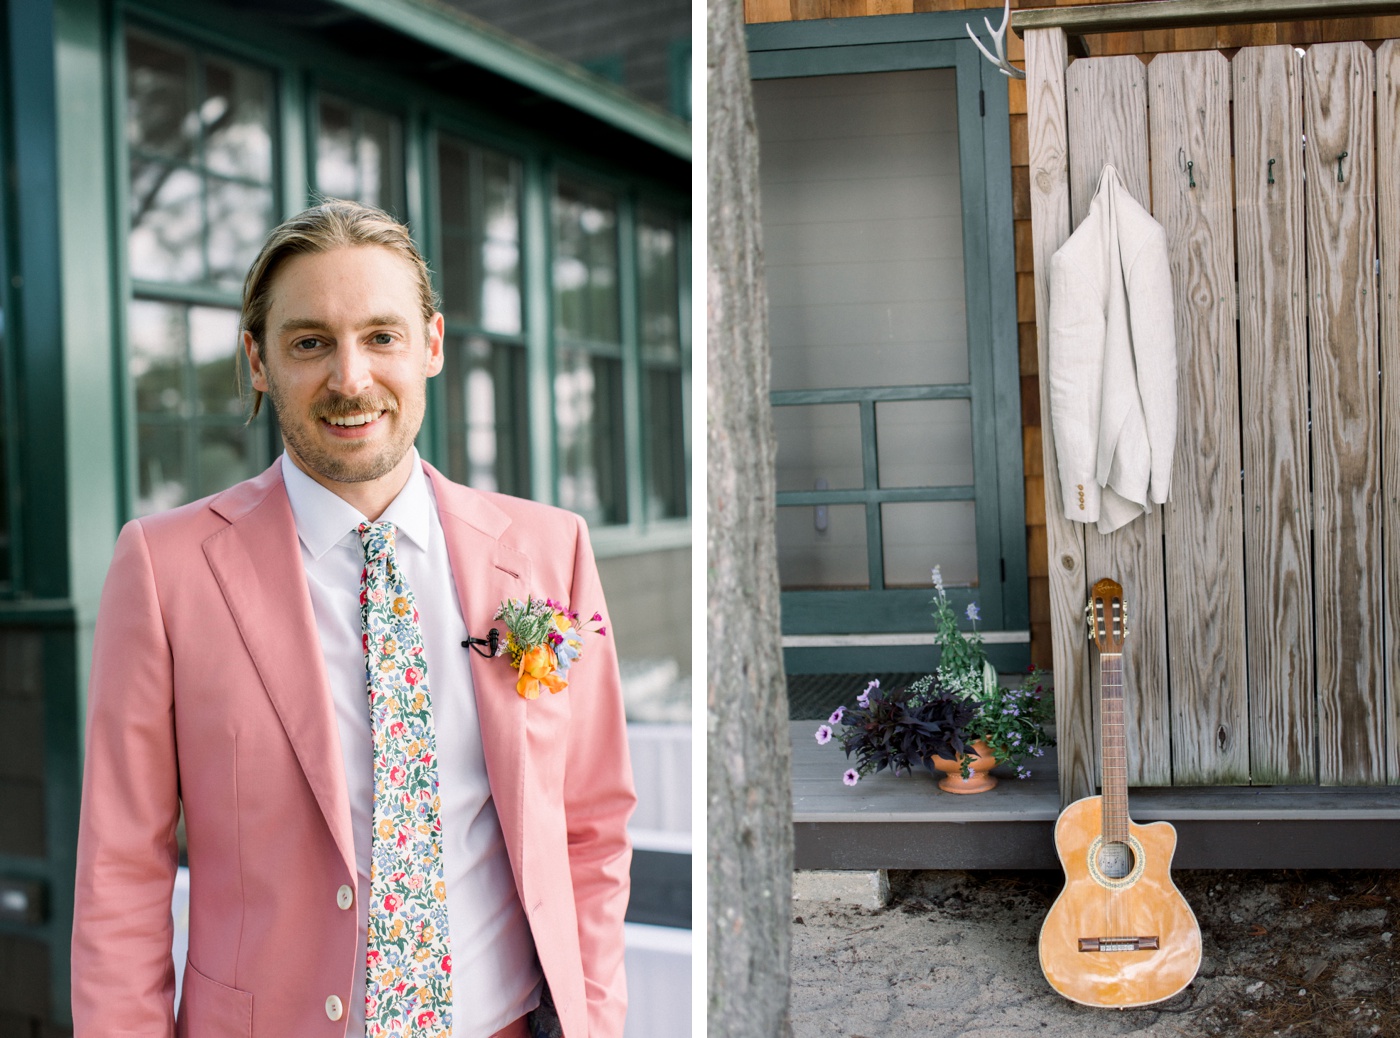 Groom wearing a pink suit with a floral necktie